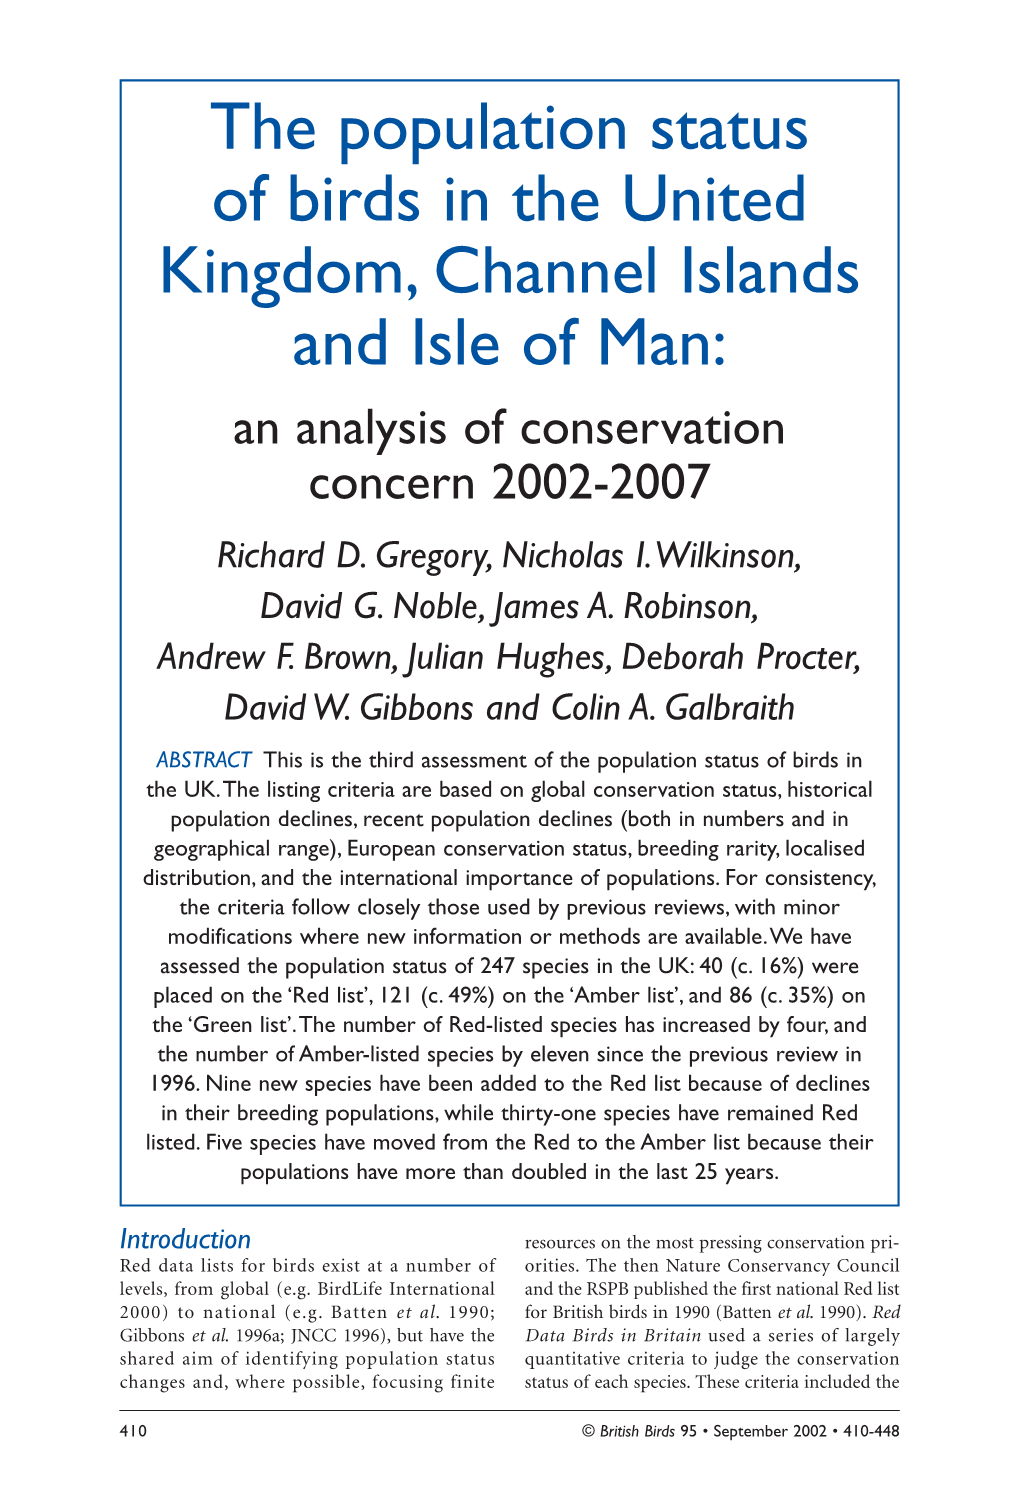 The Population Status of Birds in the United Kingdom, Channel Islands and Isle of Man: an Analysis of Conservation Concern 2002-2007 Richard D